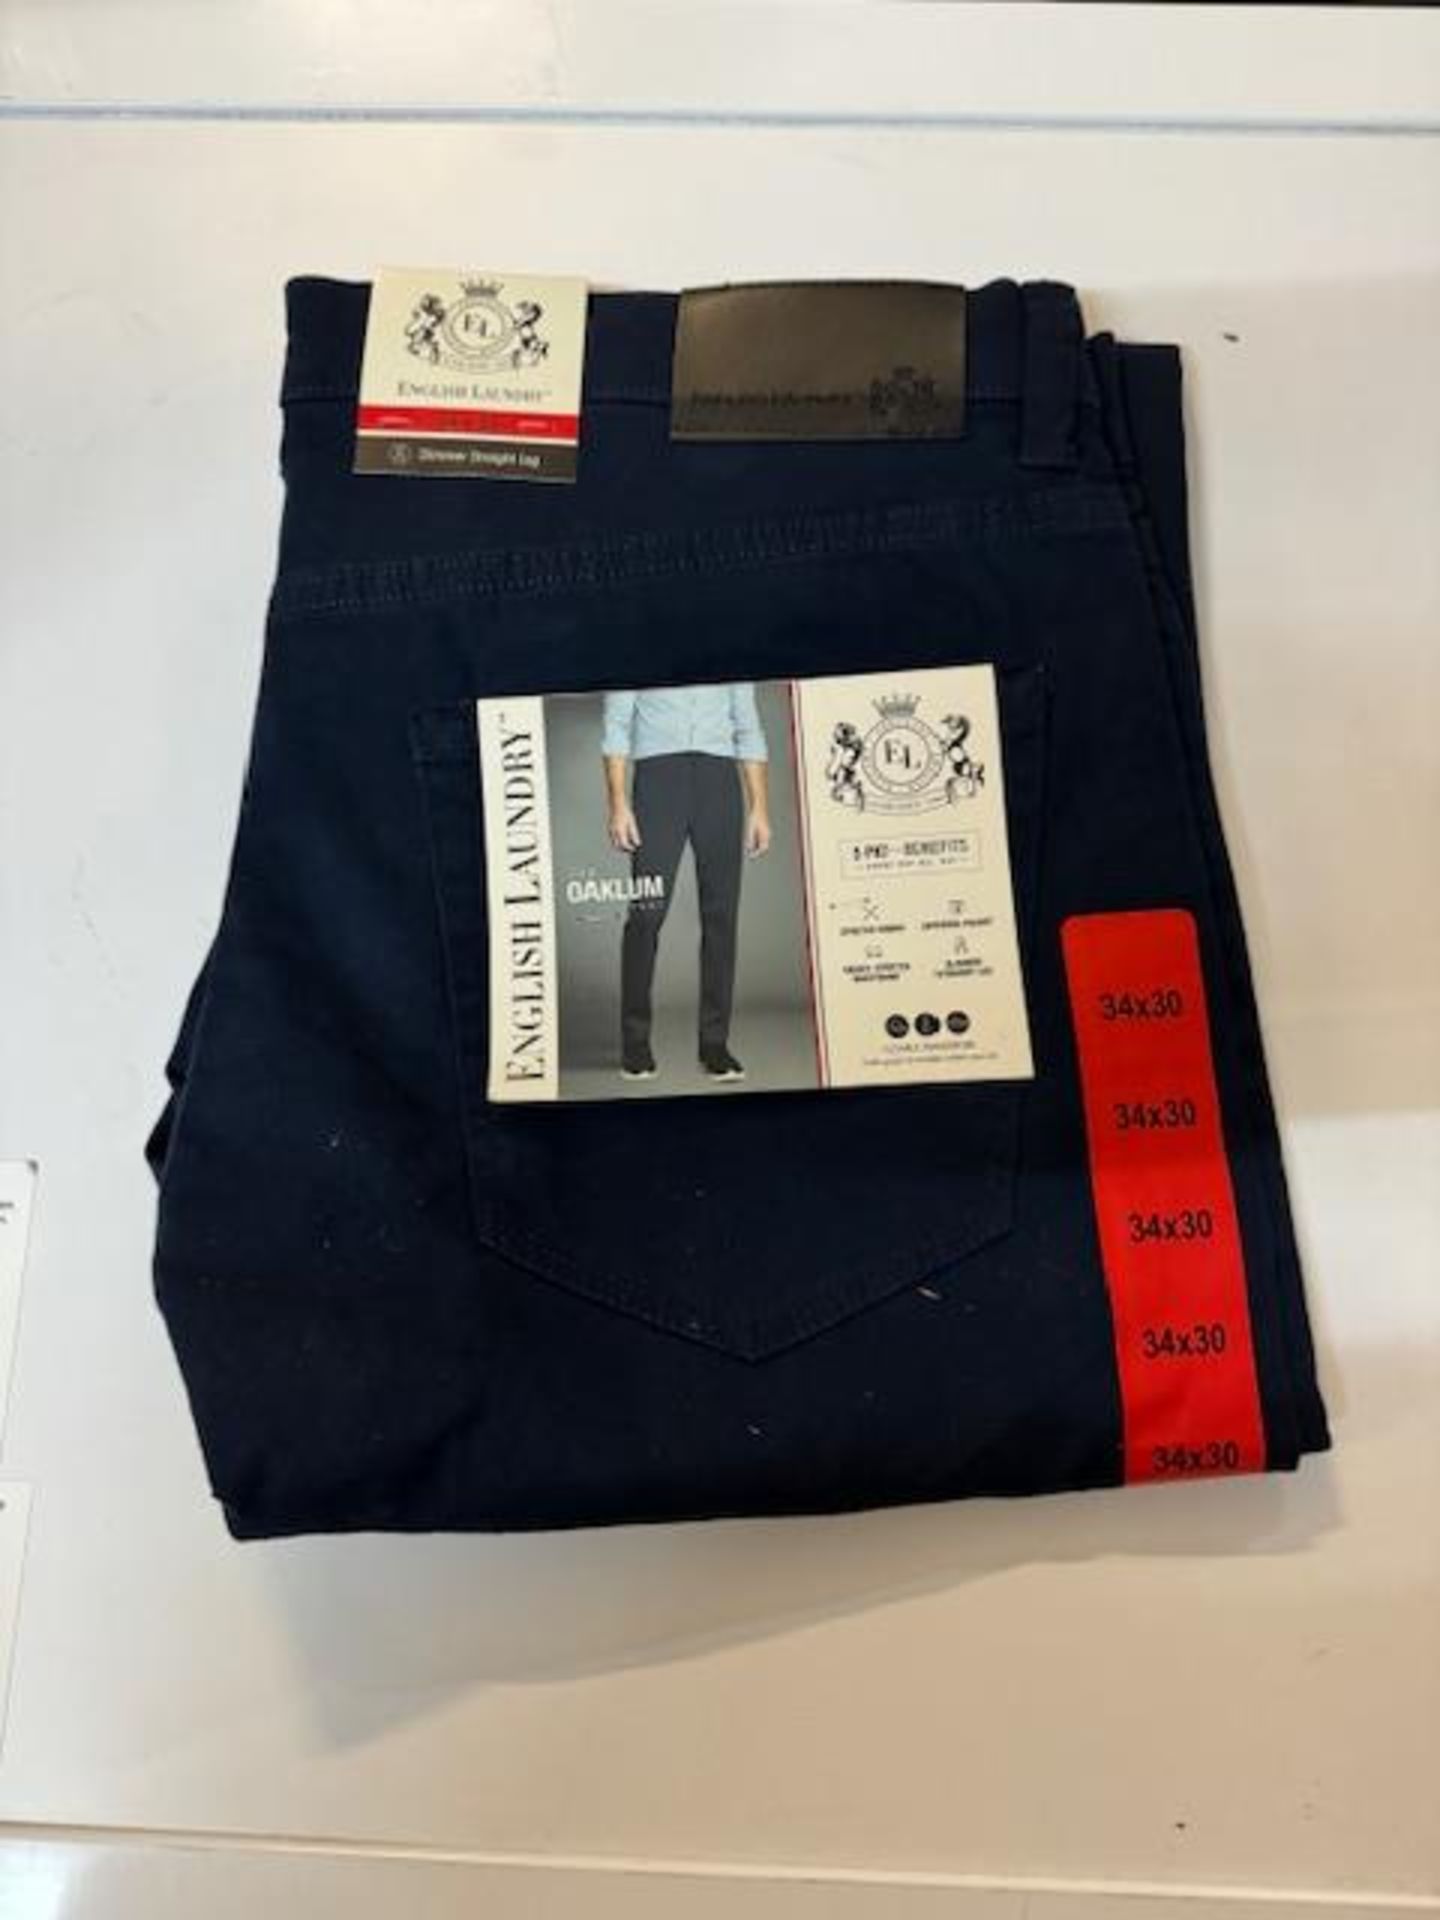 1 BRAND NEW ENGLISH LAUNDRY MIDWAY PANT, TECH STRETCH FABRIC, NAVY SIZE 34 X 30 RRP Â£24.99